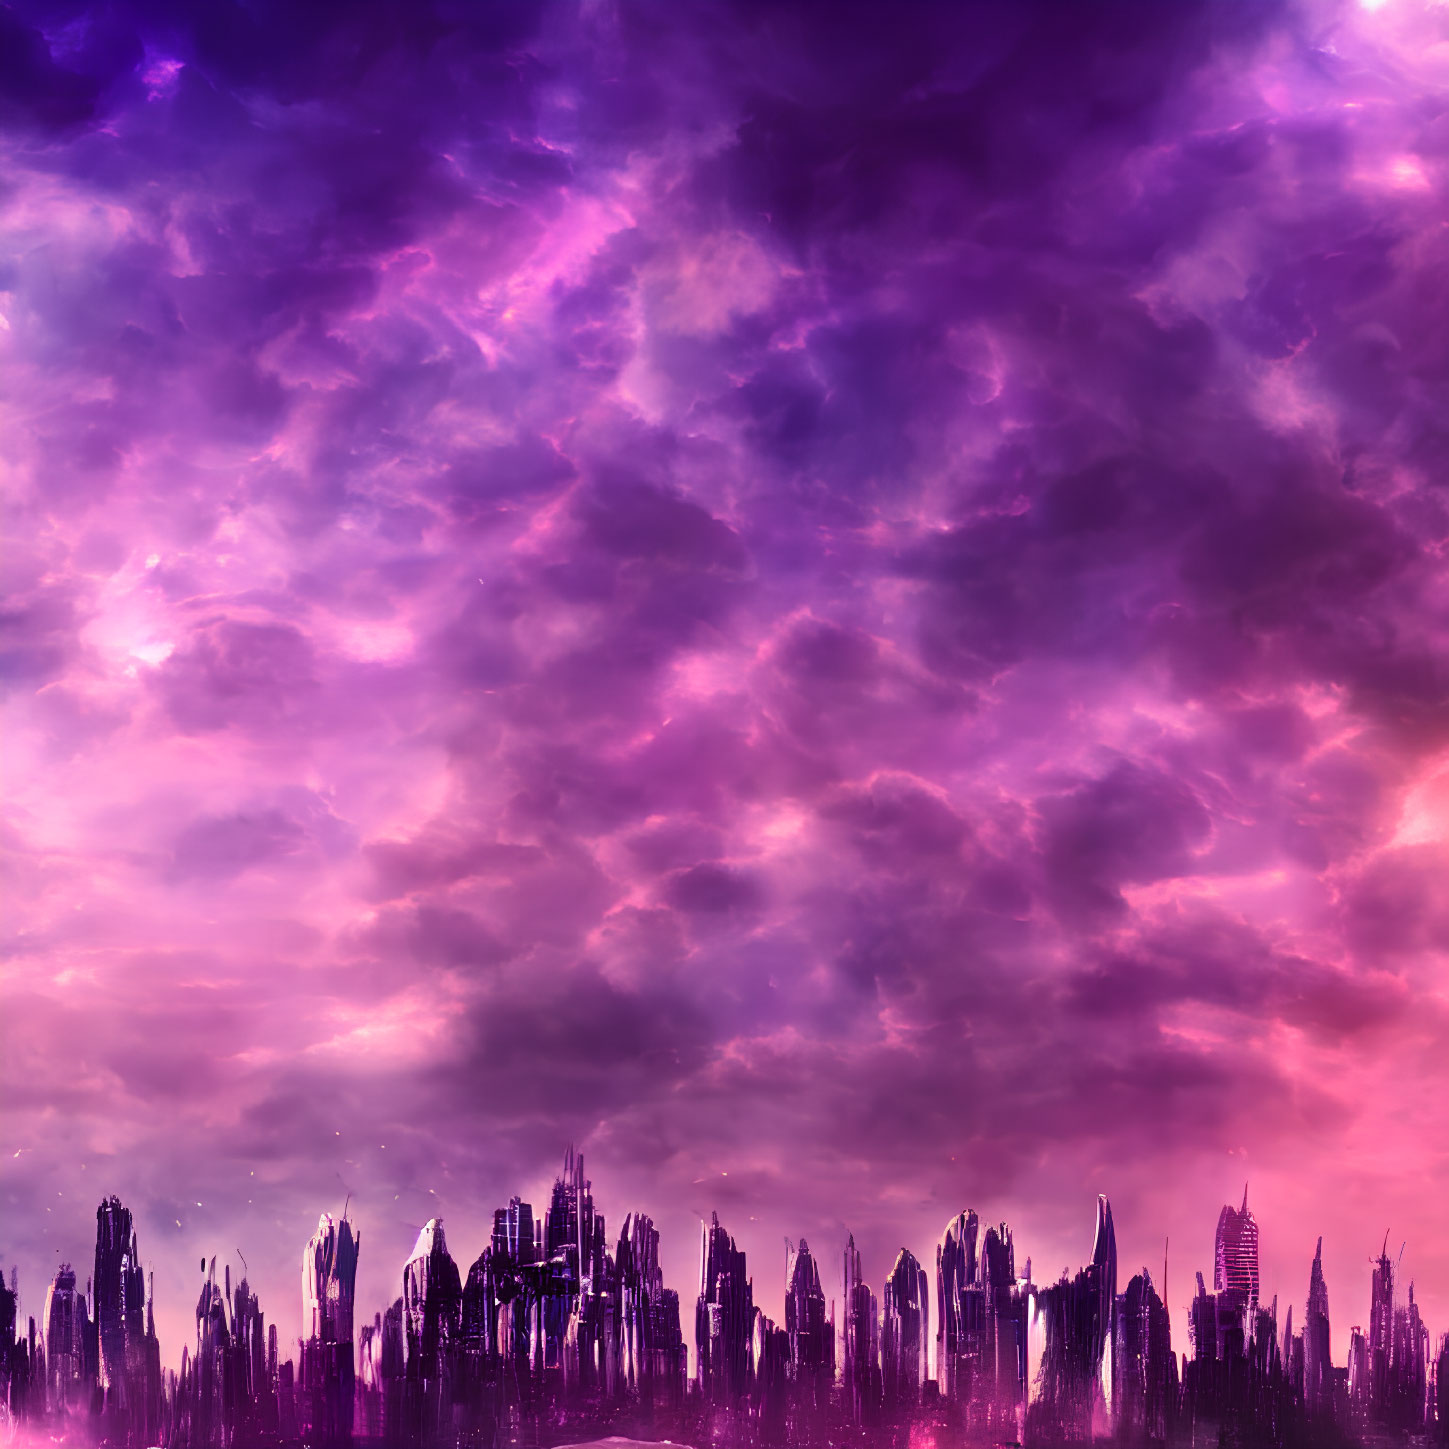 Abstract purple-hued skyline under dynamic sky with futuristic city vibes